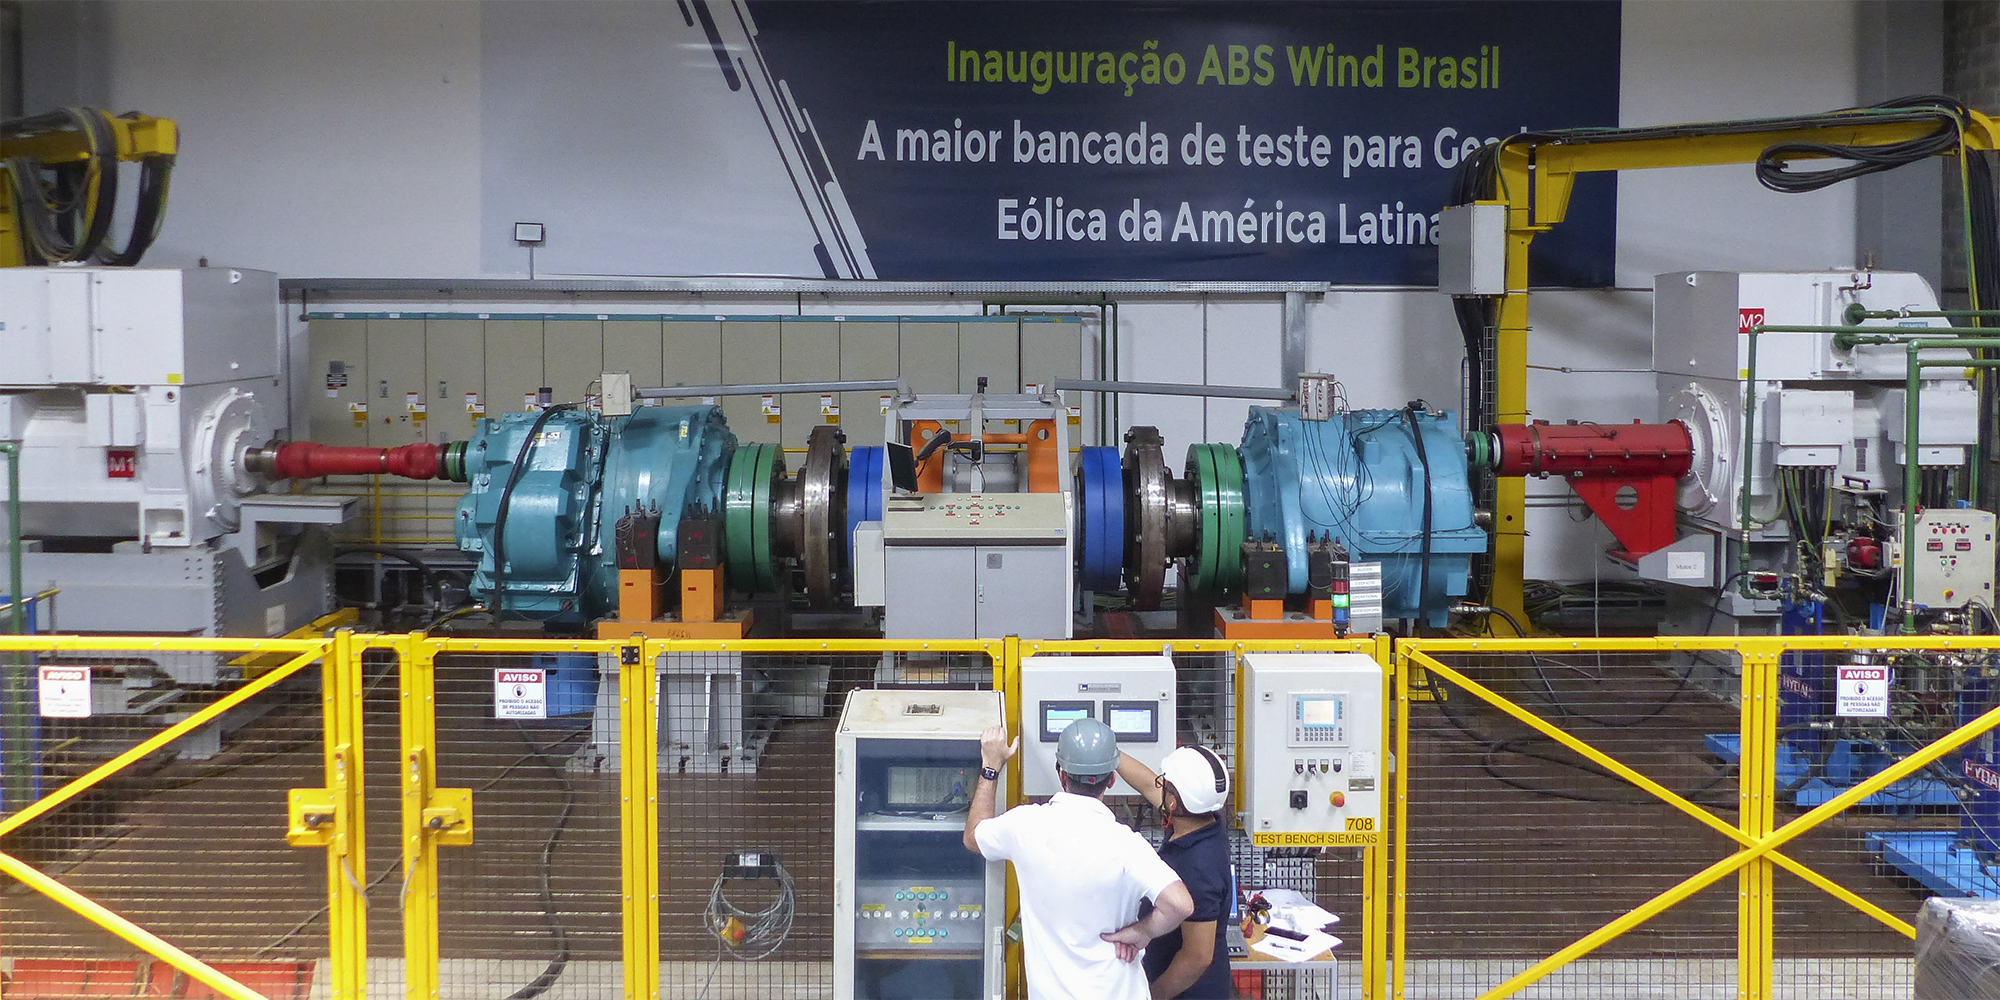 ABS Wind Brasil test bench for wind Gearboxes